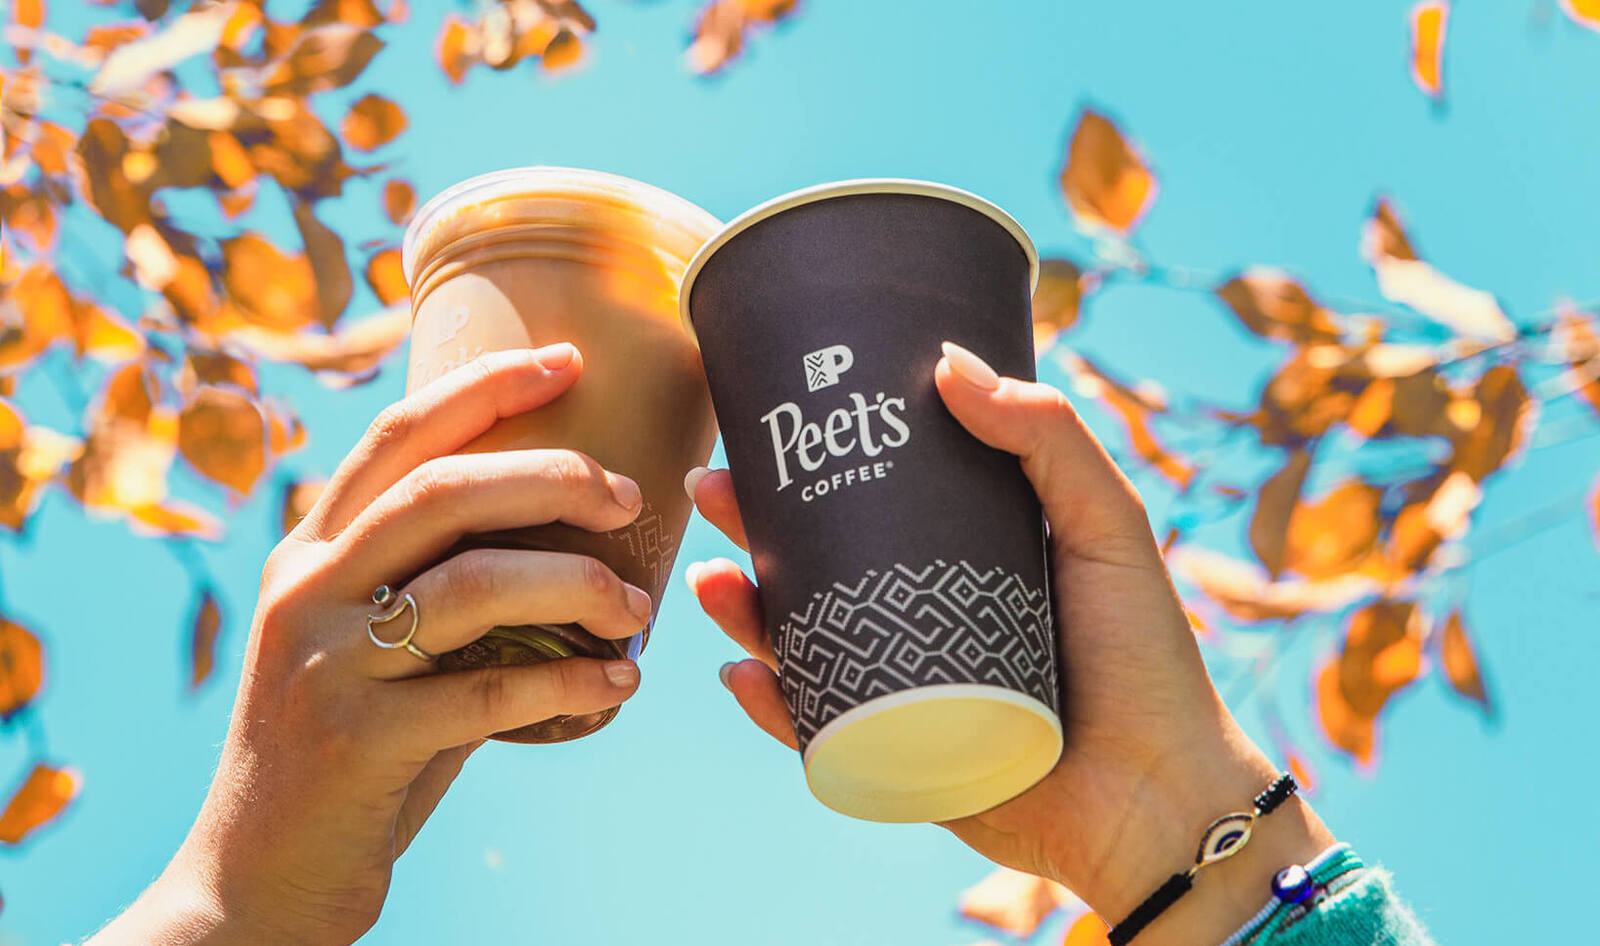 Starbucks Misses Out for 20th Straight Year as These 4 Chains Corner the Vegan PSL Market